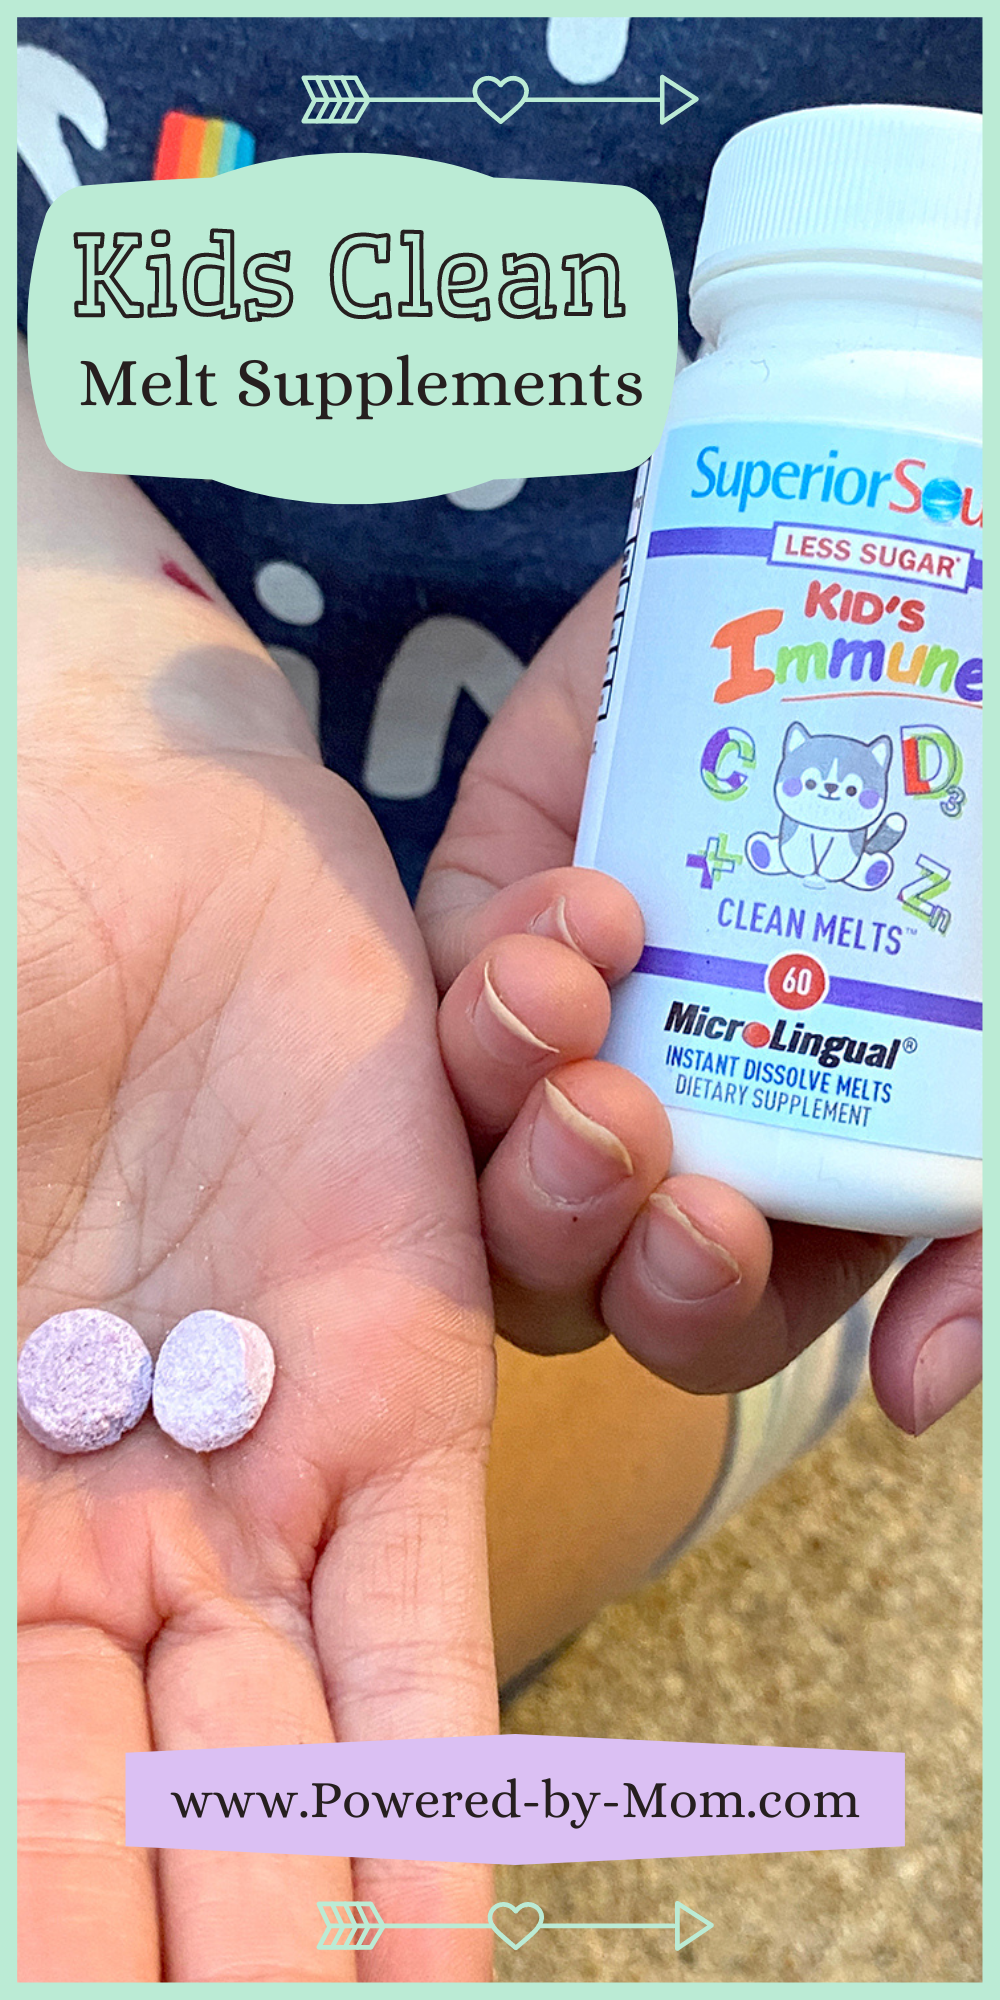 Try out Superior Source's newest line of Clean Melts. They are Microlingual kids supplements made with less sugar.  